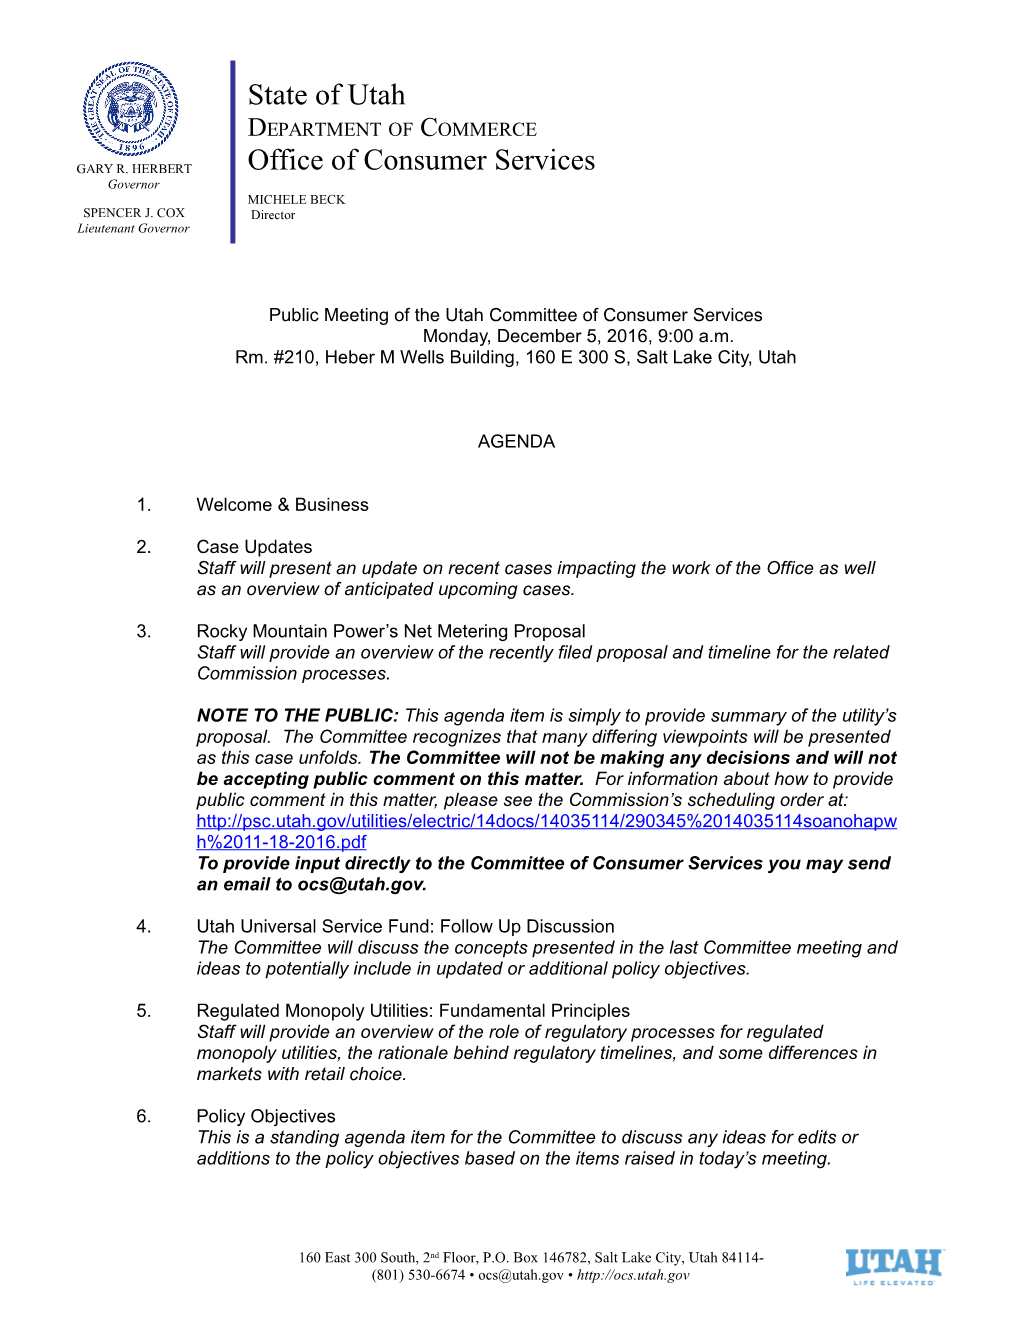 Public Meeting of the Utah Committee of Consumer Services